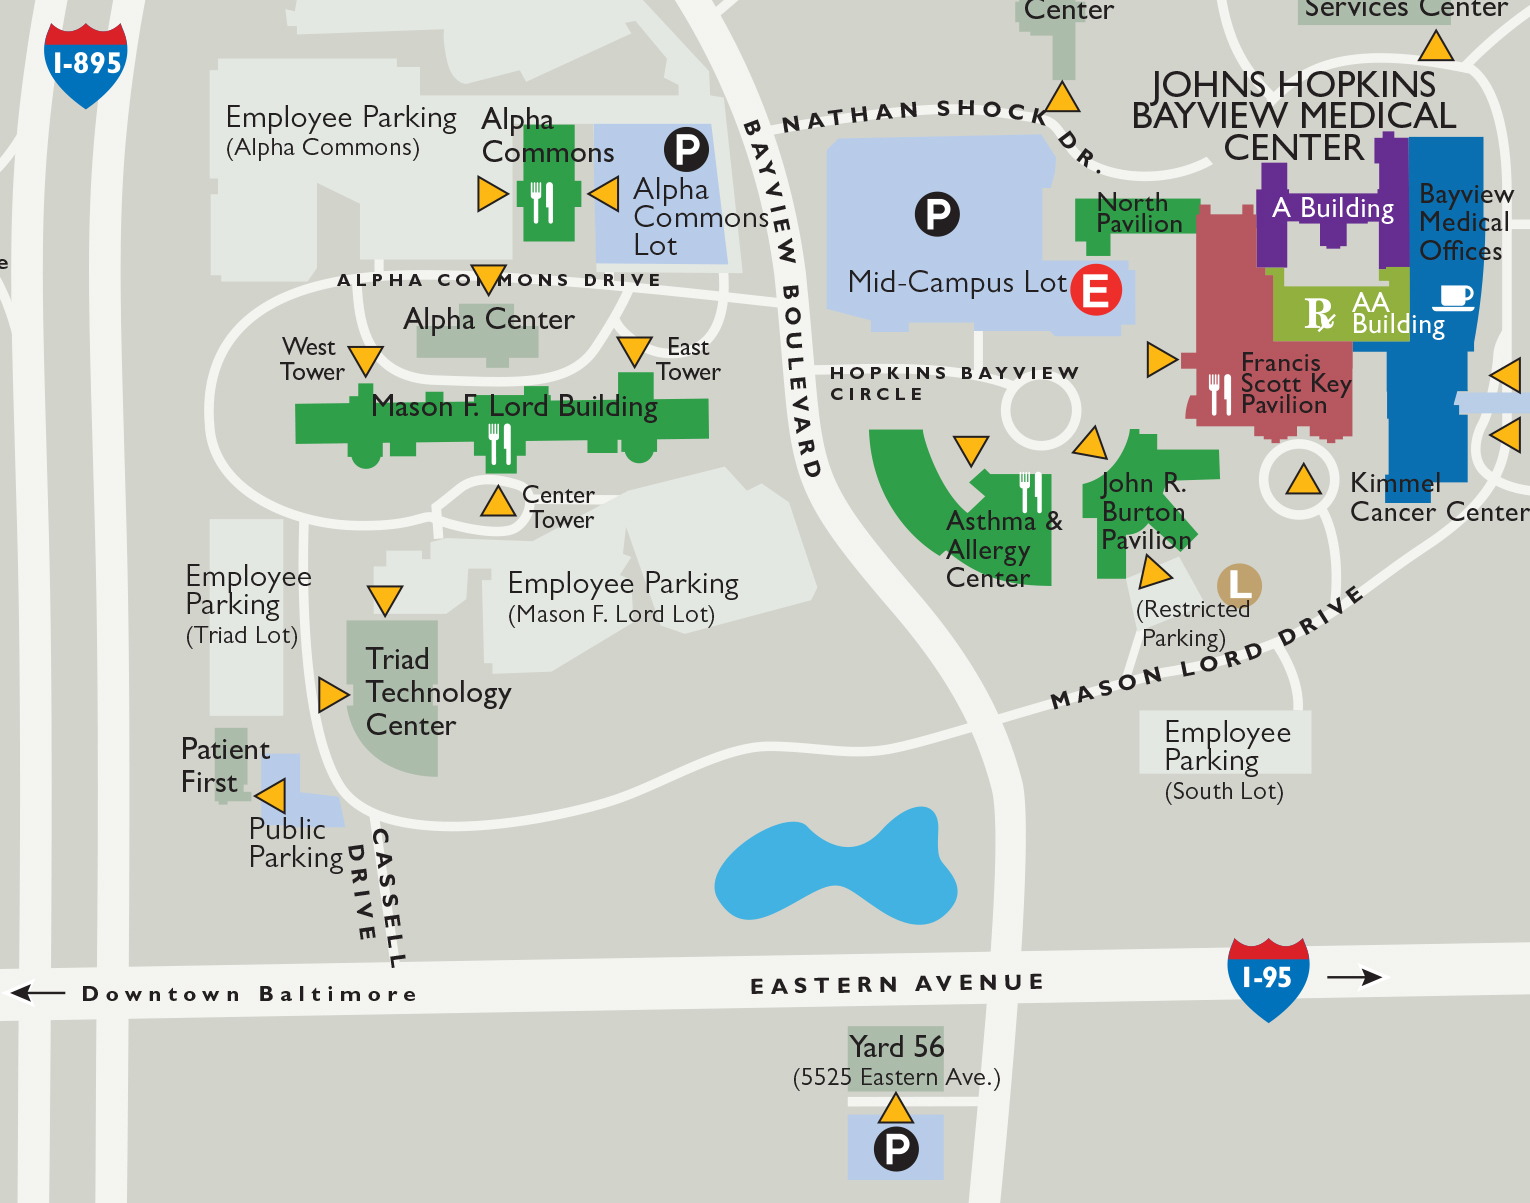 Map of Johns Hopkins Bayview campus. Yard 56 is at the bottom off Eastern Ave.